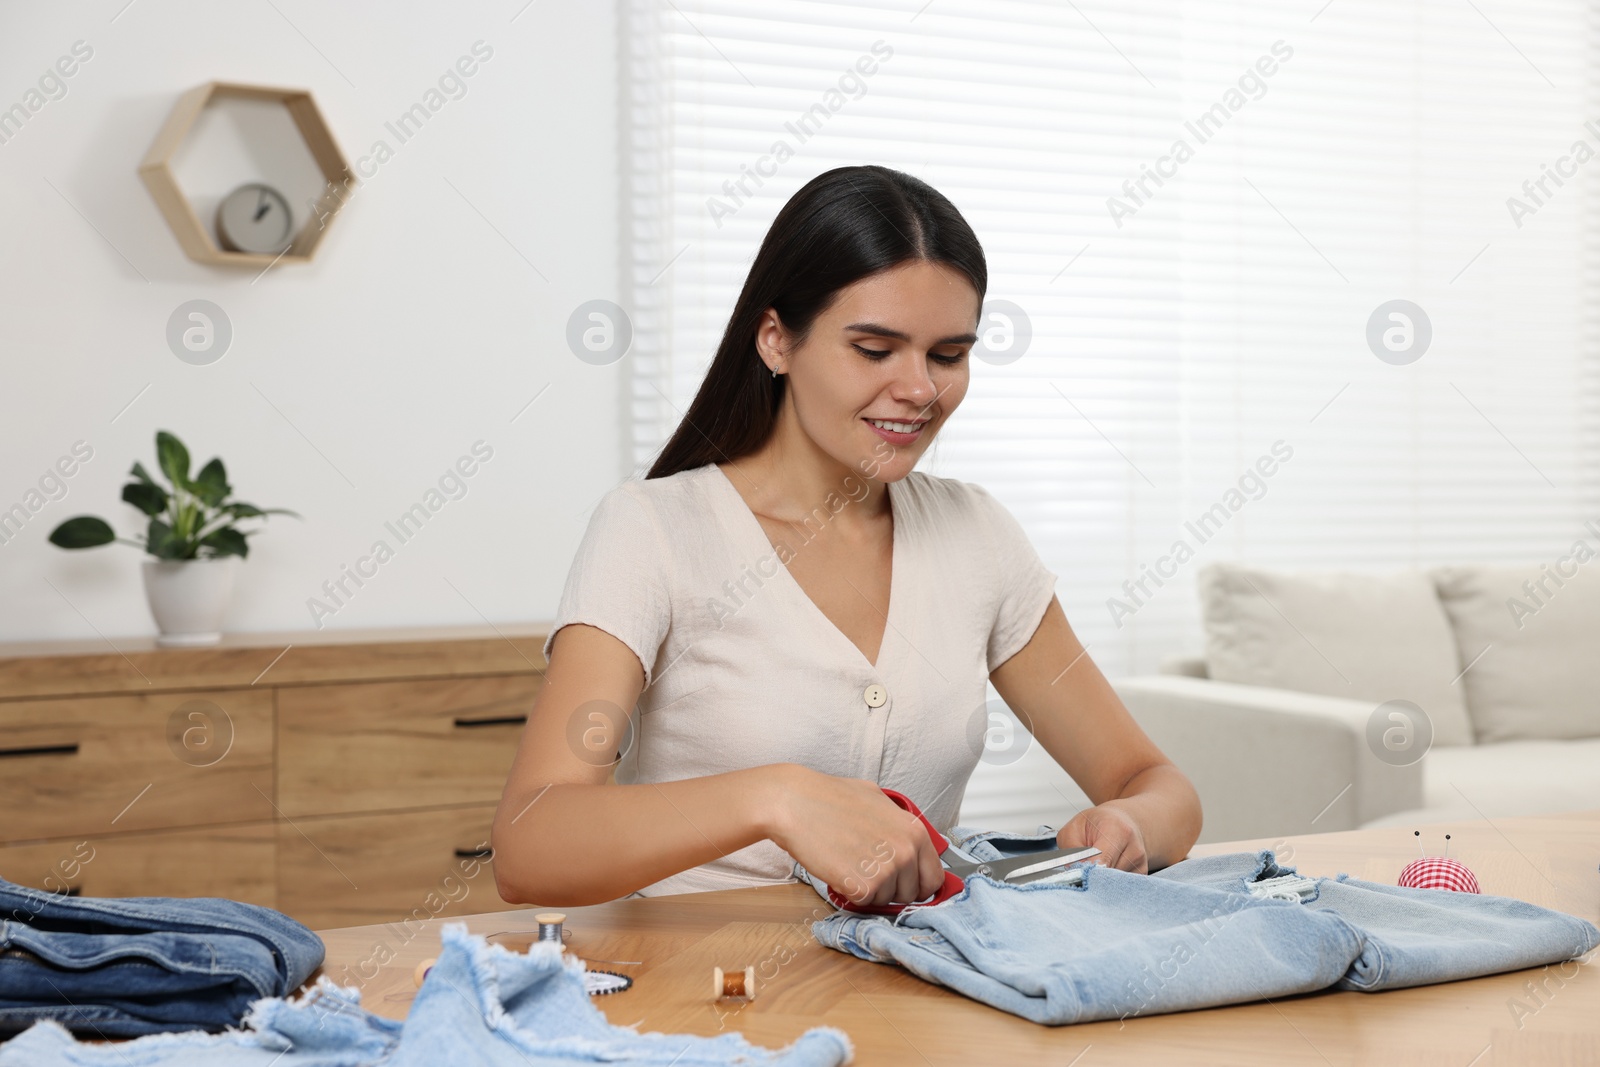 Photo of Young woman cutting jeans with scissors at wooden table indoors